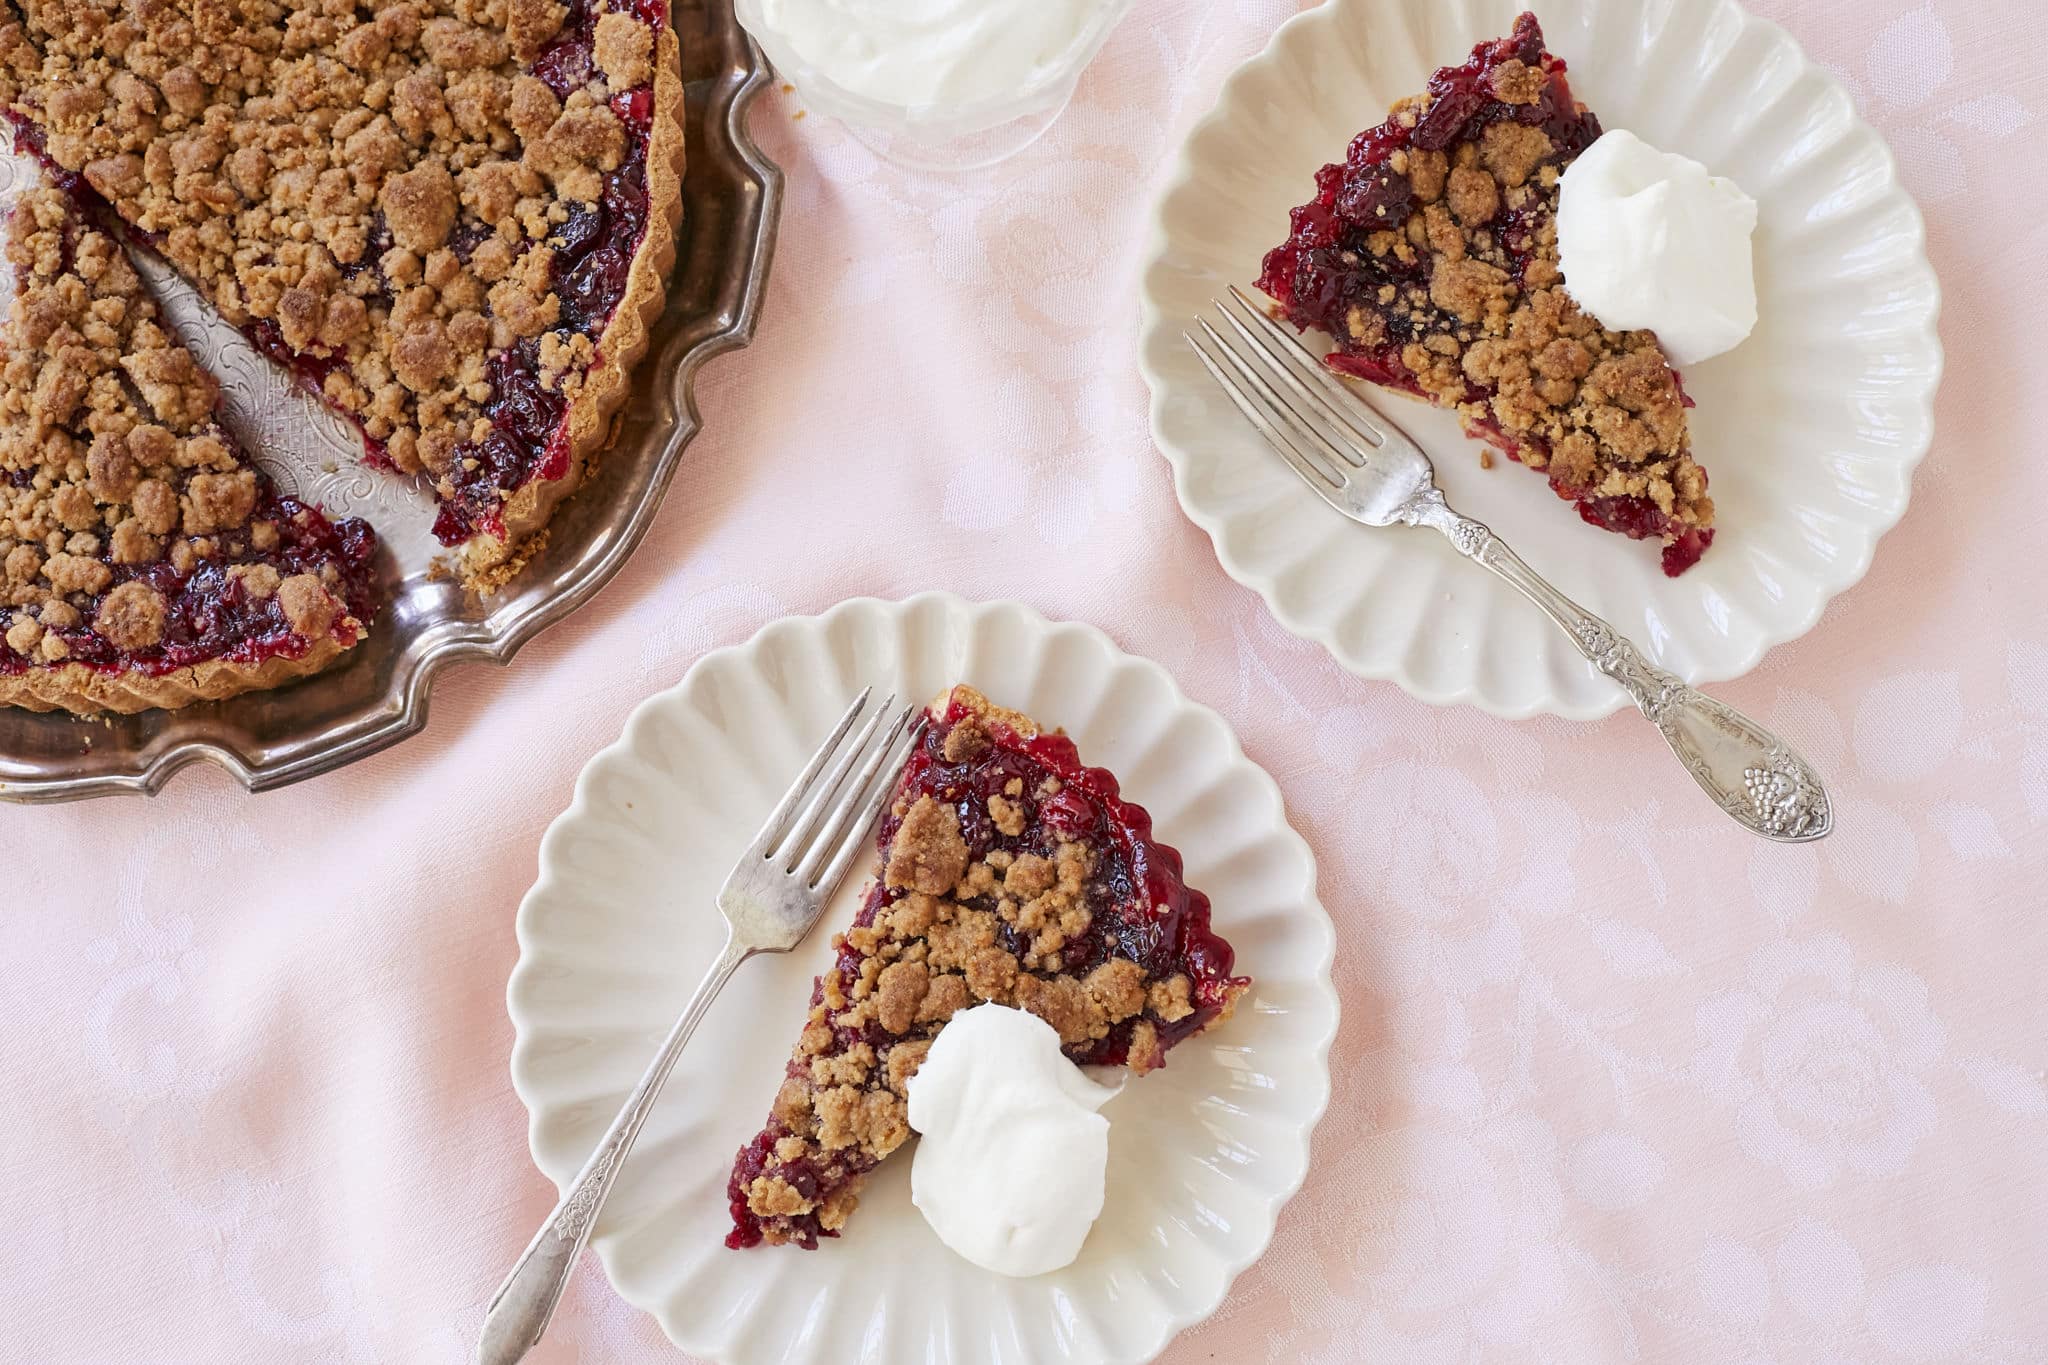 Two slices of homemade Cranberry Orange Crumb Tart are served on white dishes with a dollop of homemade whipped cream.